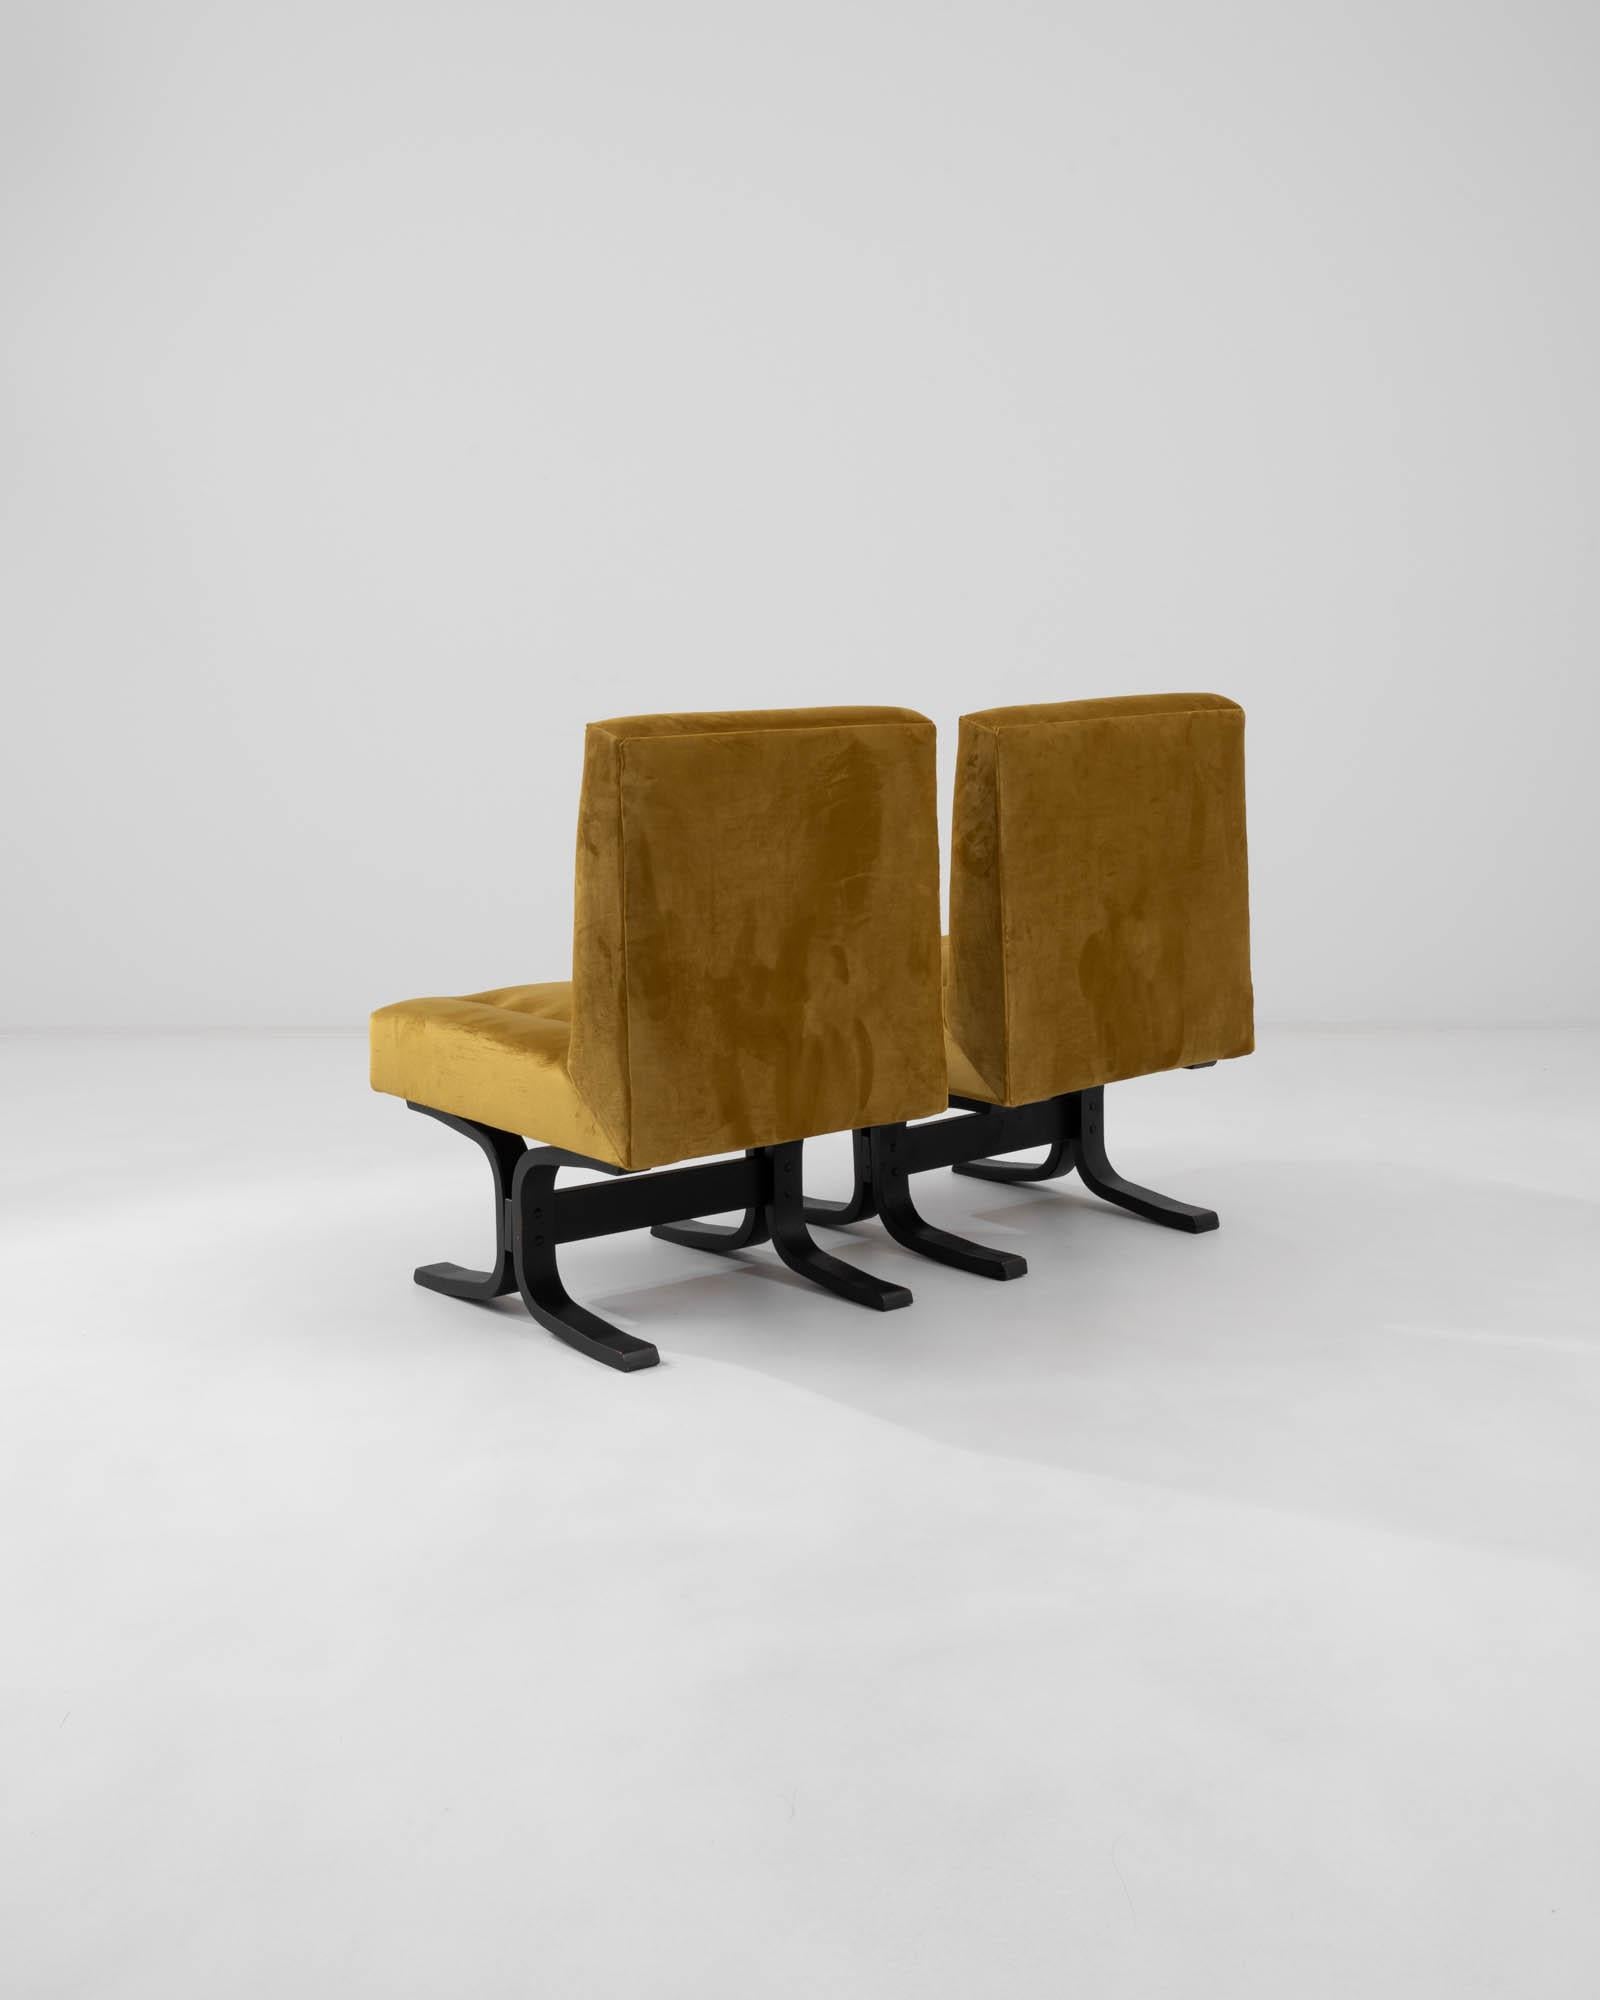 1960 Czechia Upholstered Chairs by Ludvik Volak, Set of 2 For Sale 2